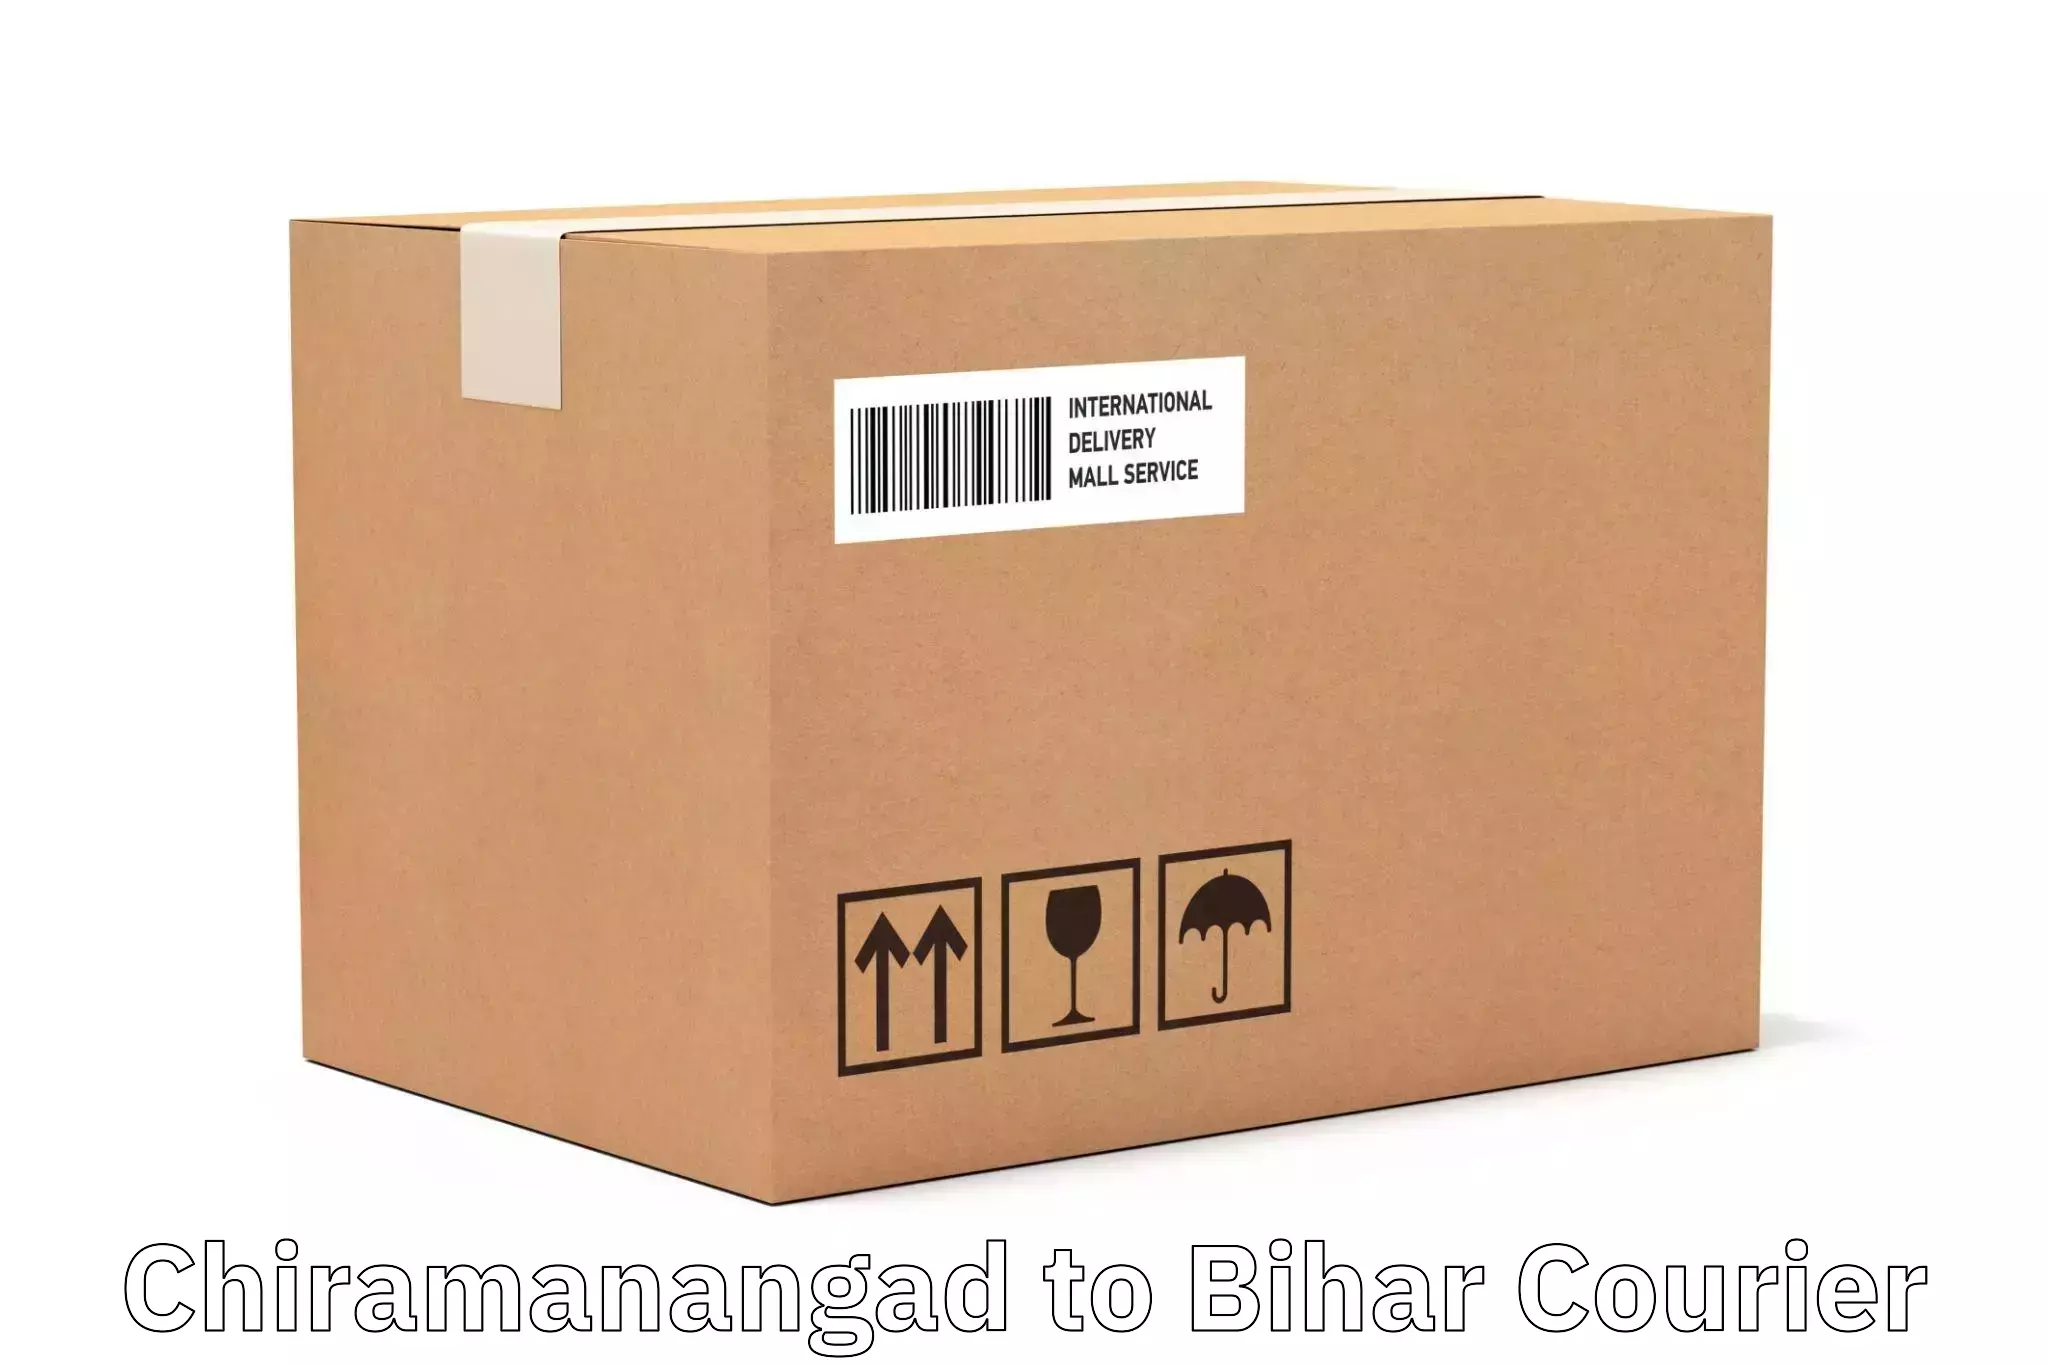 Easy access courier services Chiramanangad to Katoria